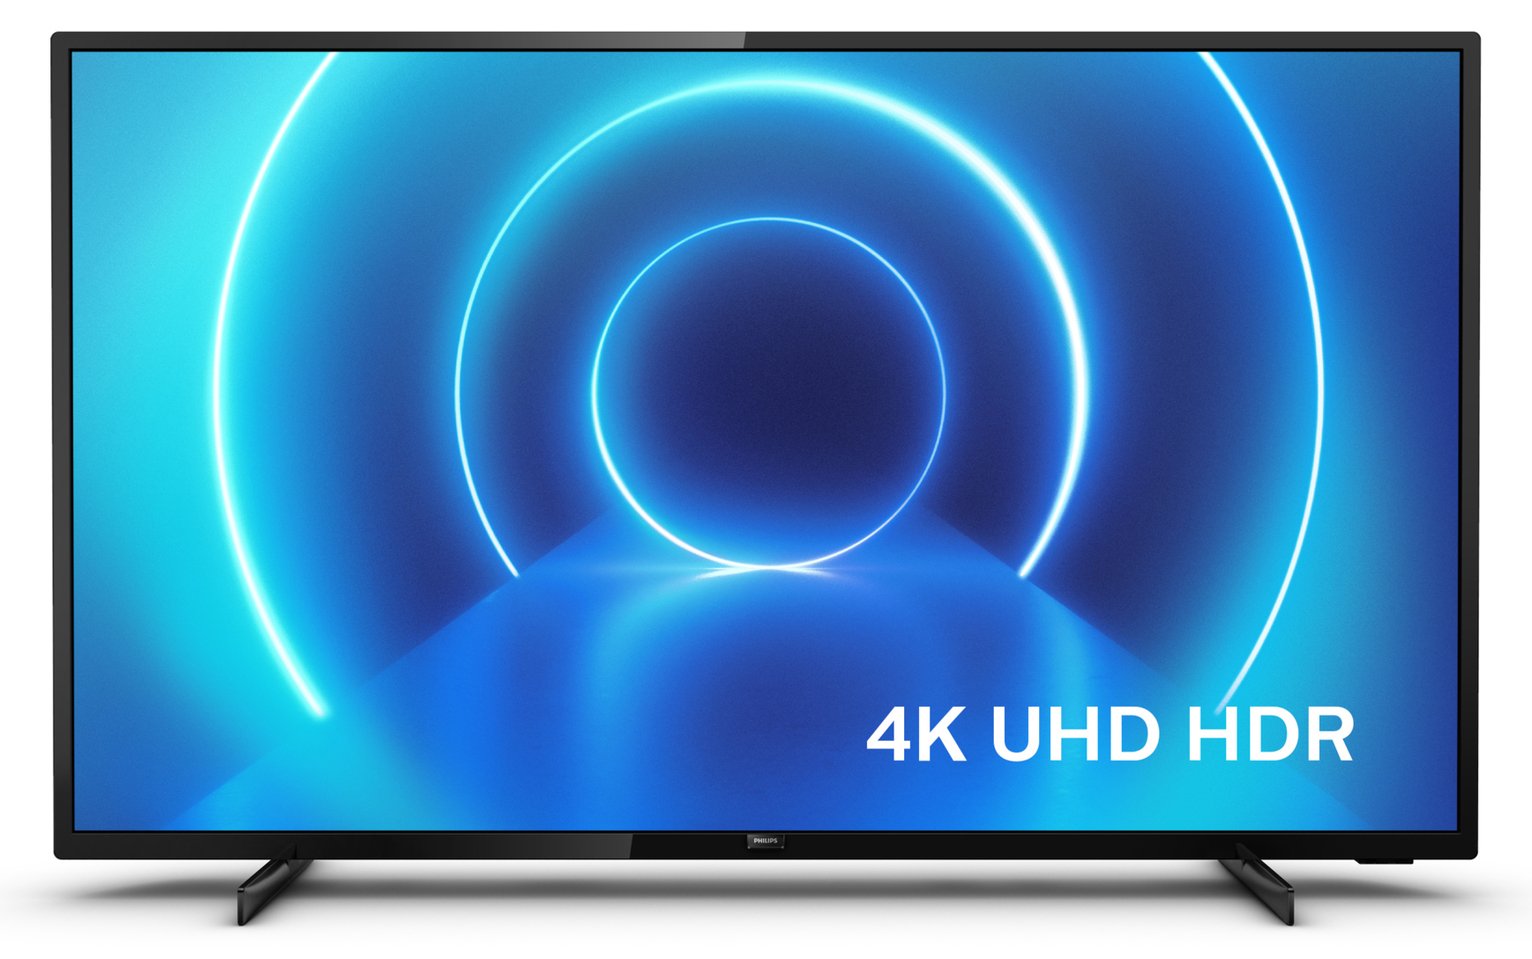 Philips 43 Inch 43PUS7505 Smart 4K Ultra HD LED TV with HDR Review